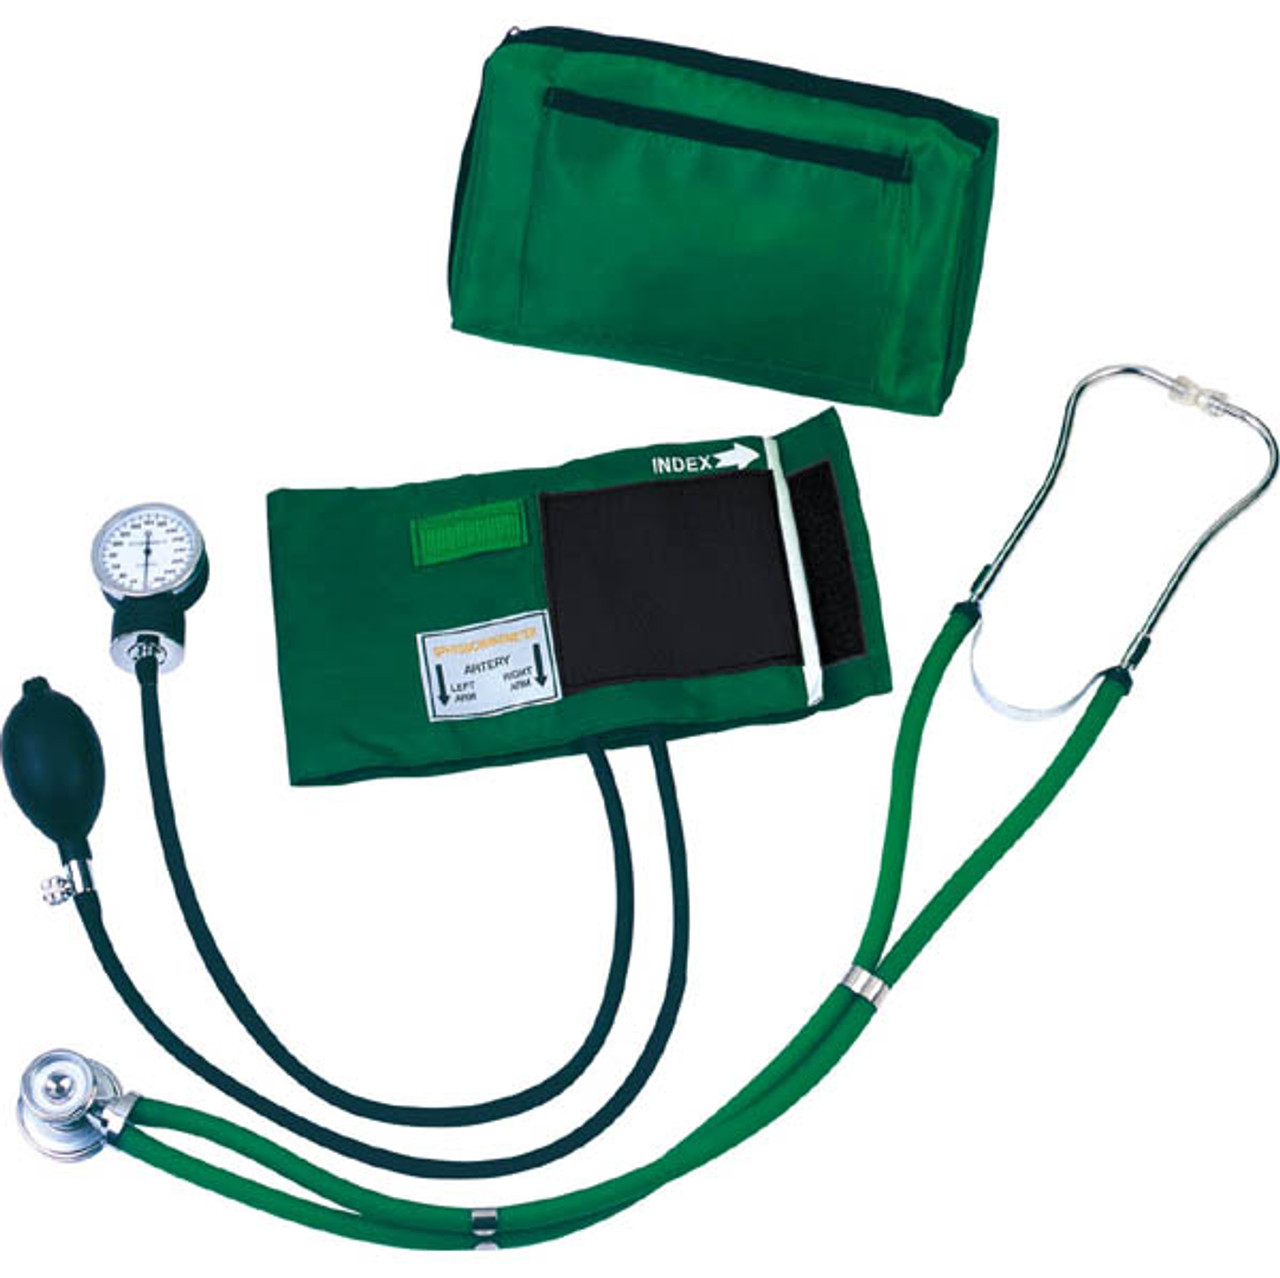 LANE Aneroid Sphygmomanometer with Sprague Rappaport Stethoscope Kit in  Large Carrying case Comes with Pocket Organizer containing Name tag Kelly  Forceps, Lister Scissors and high Intensity penlight. Comes in 5 colors